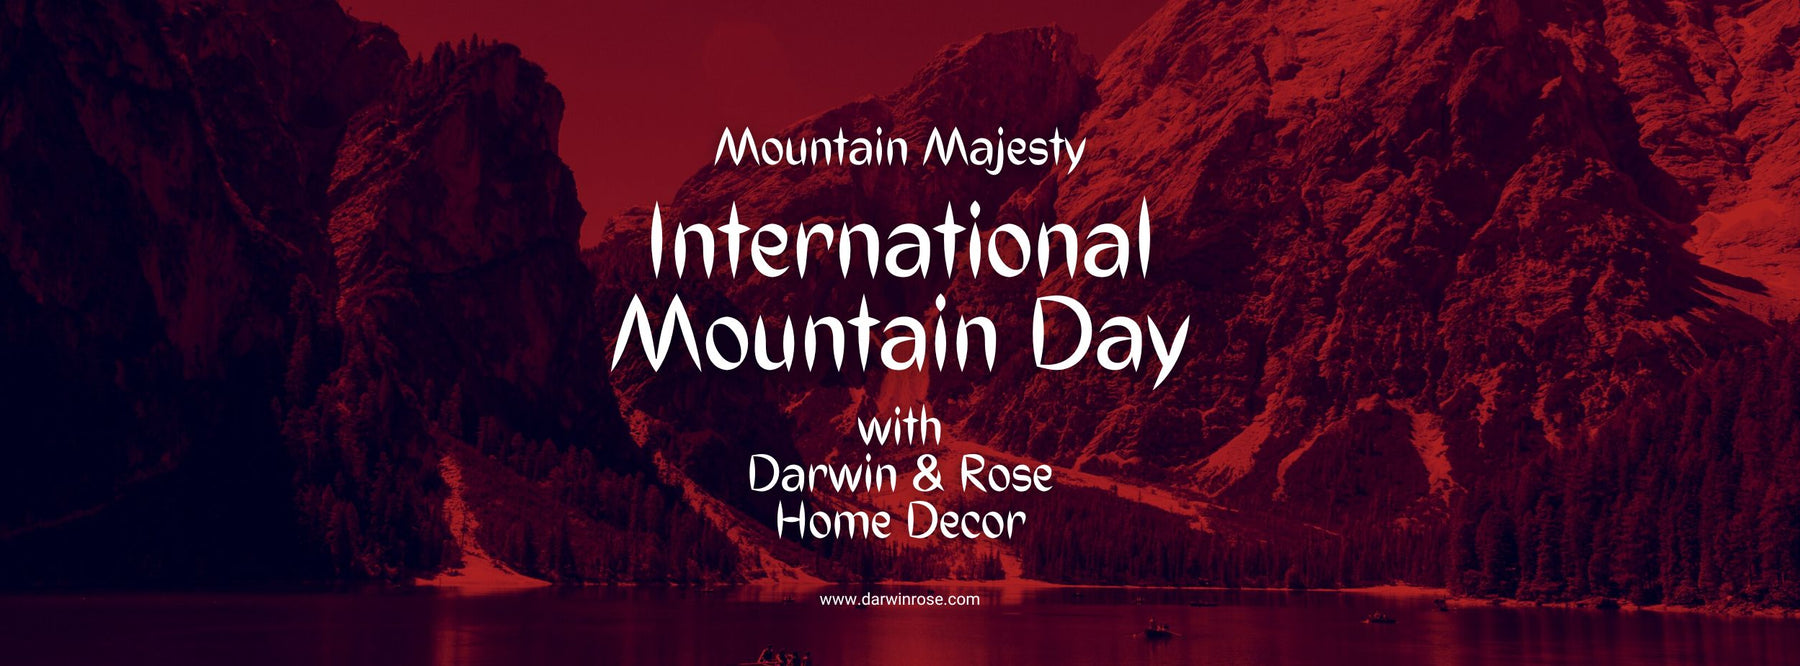 Mountain Majesty at International Mountain Day with Darwin & Rose Home Decor